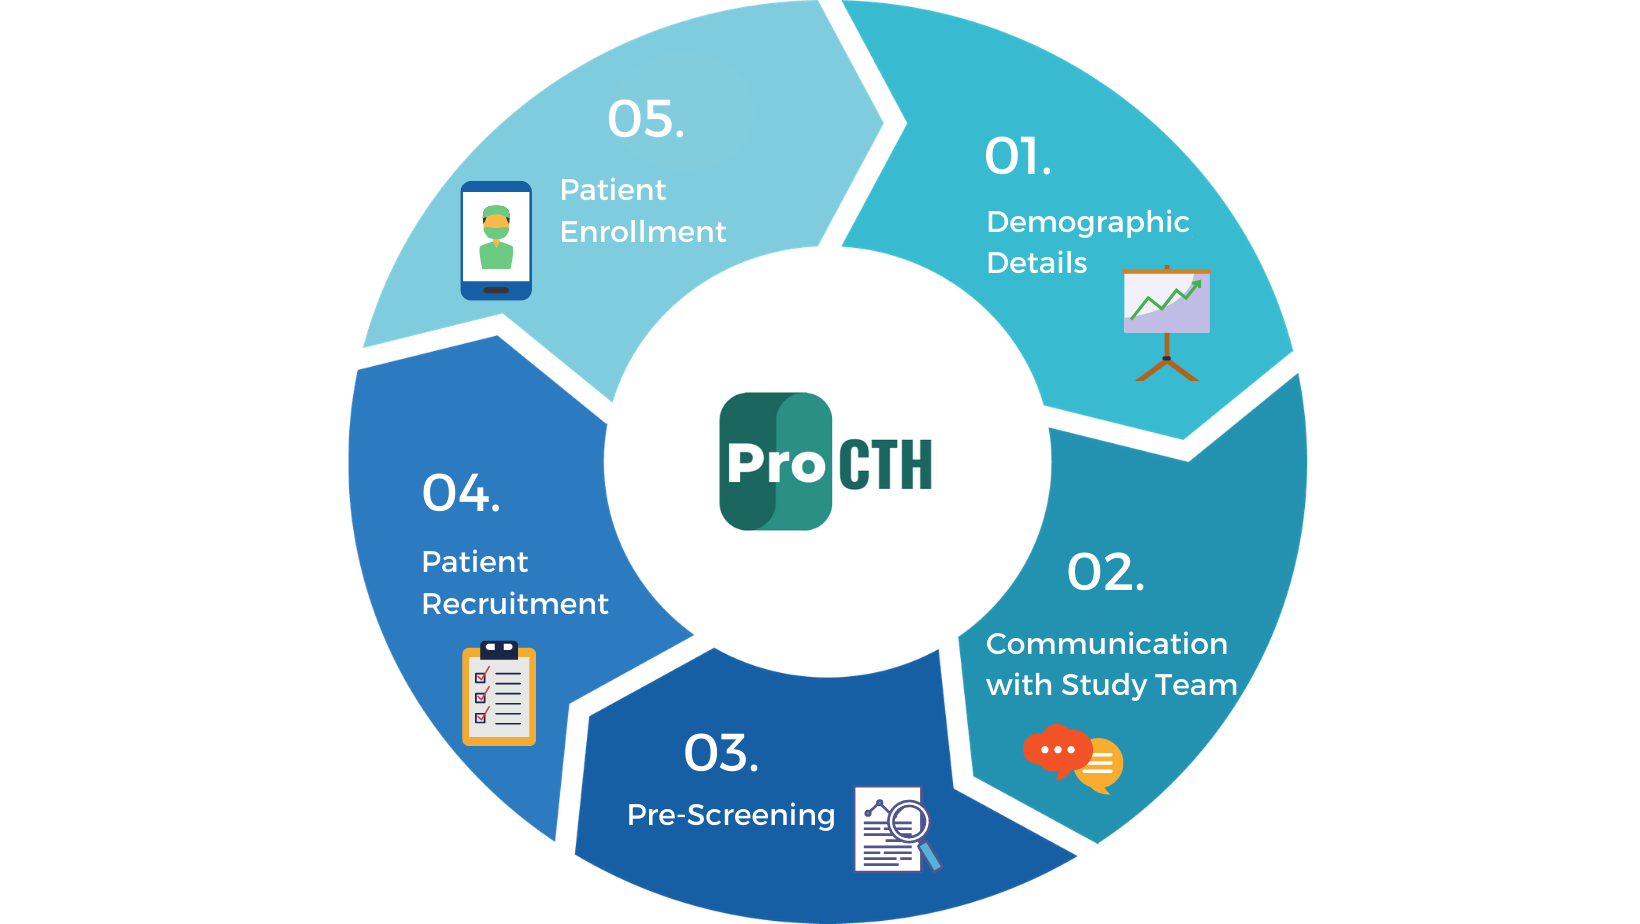 About ProCTH mobile application